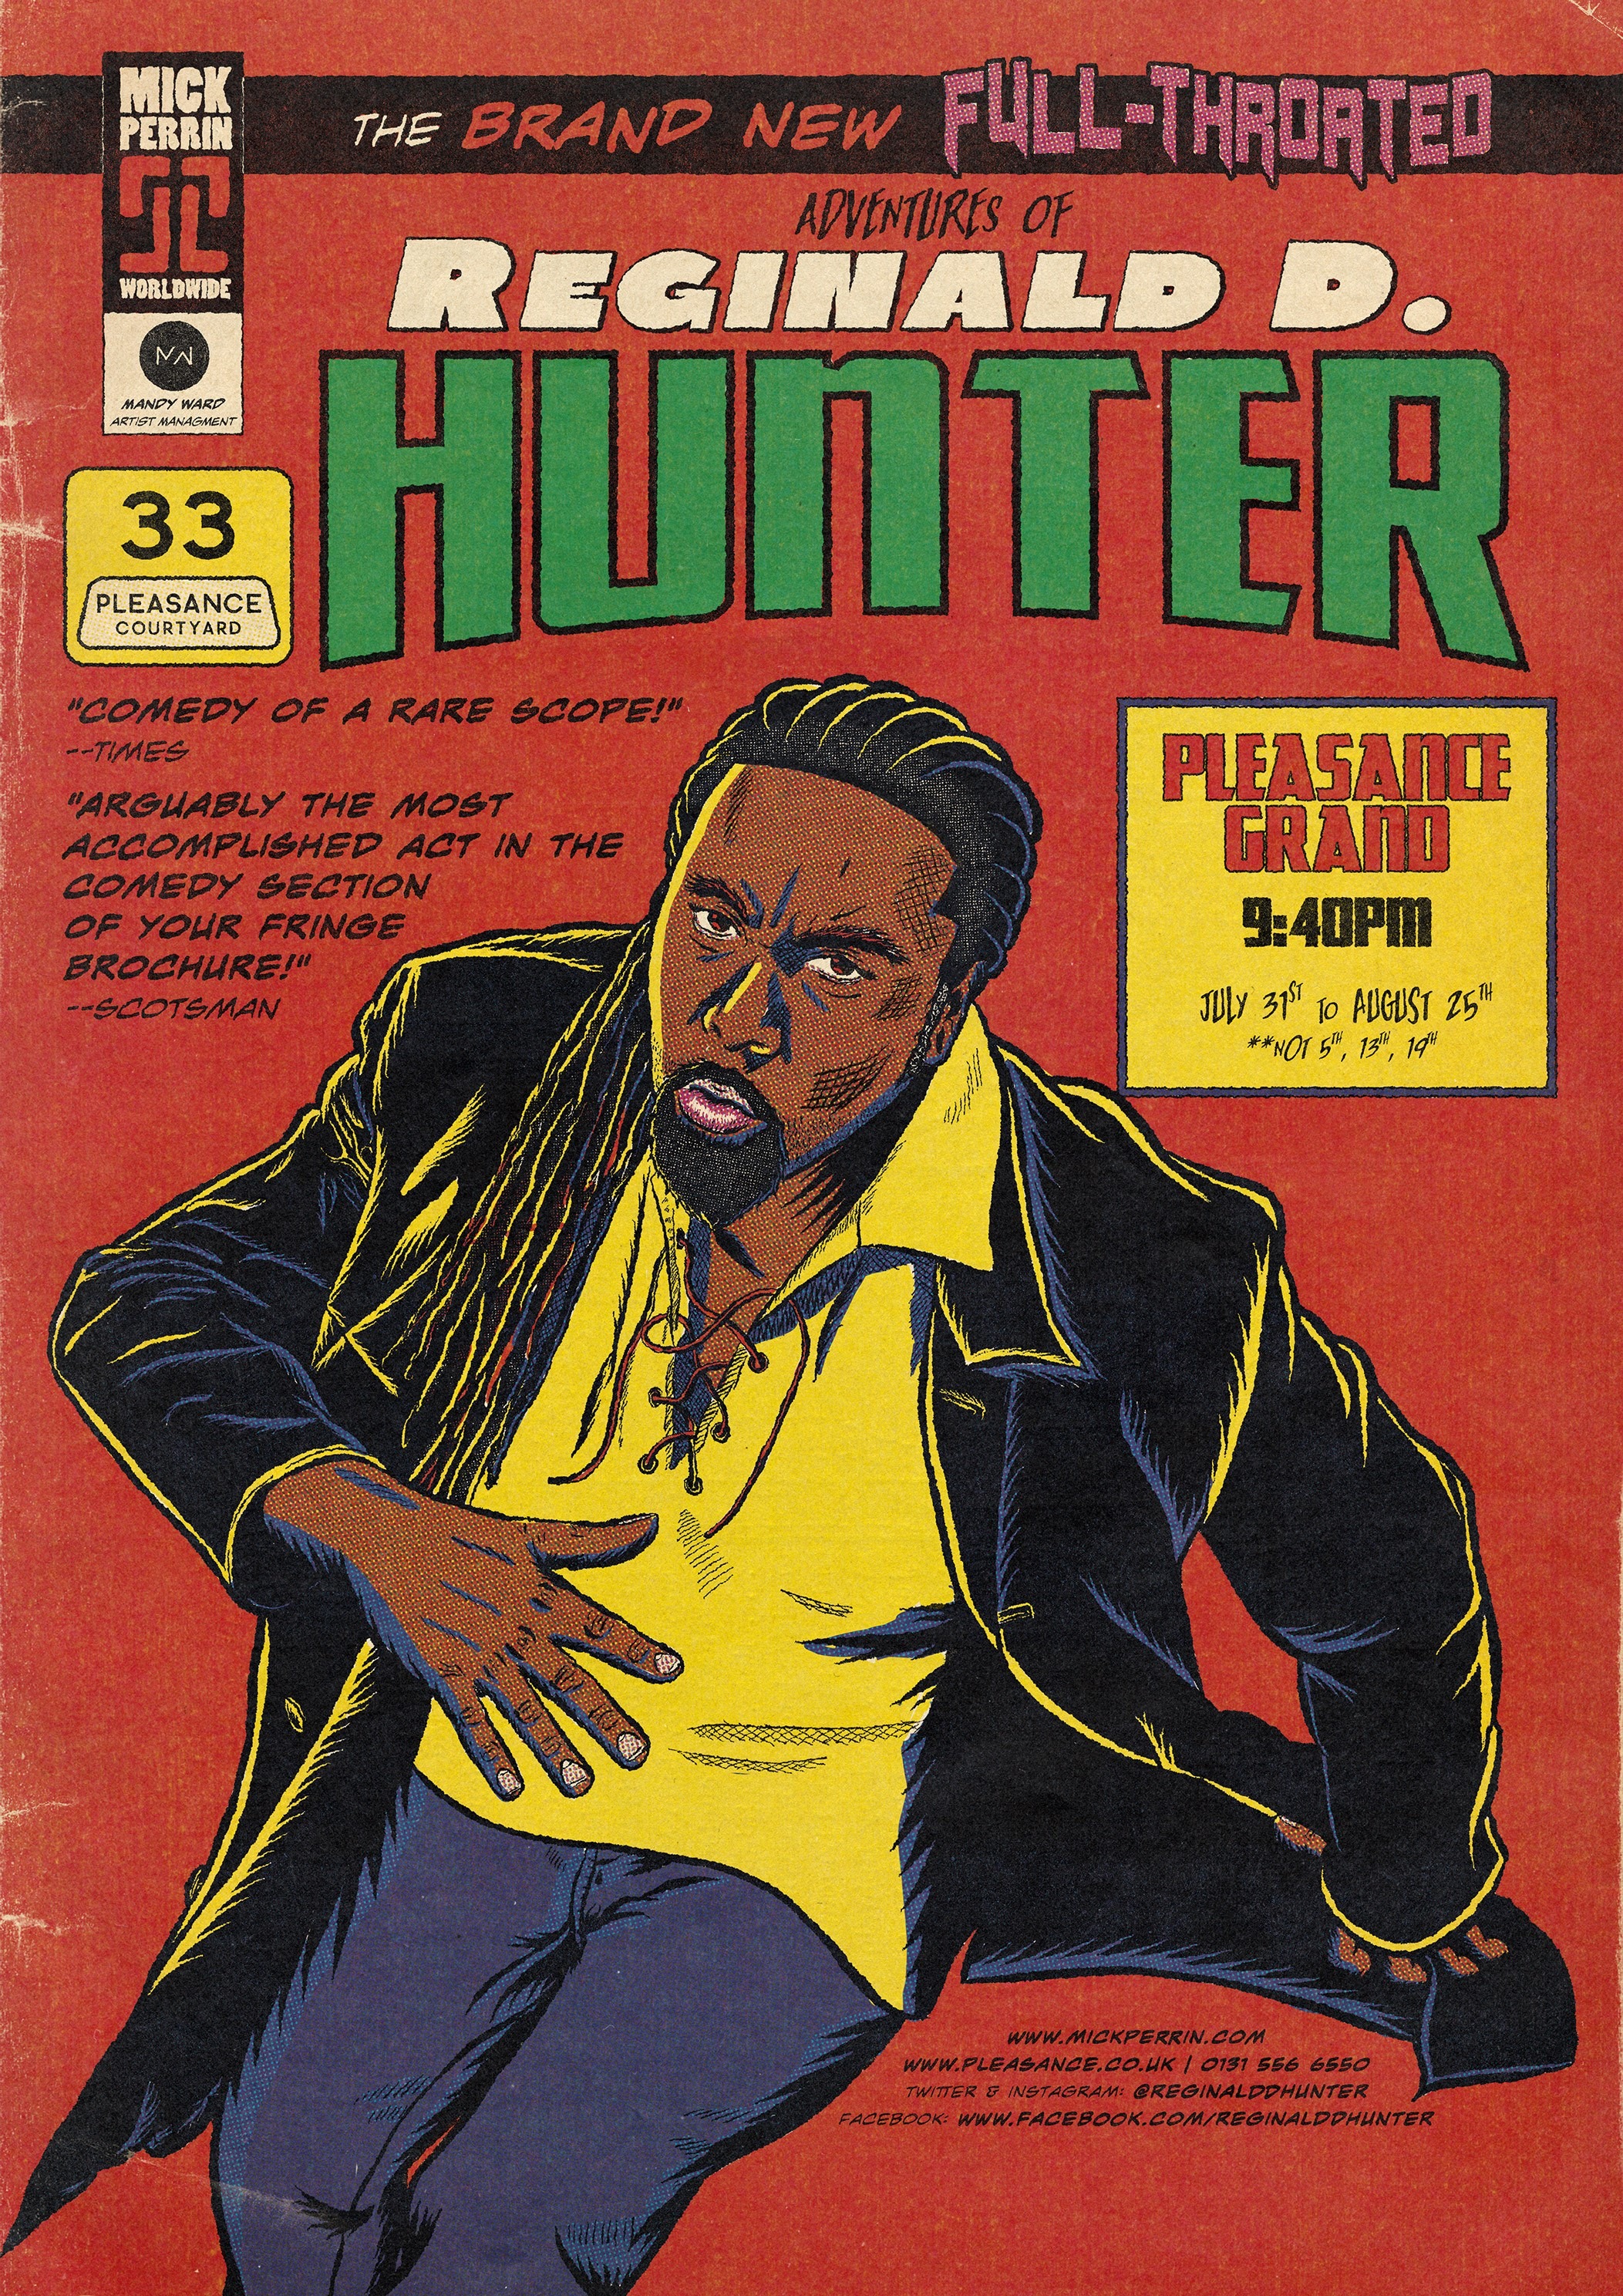 The poster for The Brand-New, Full-Throated Adventures of Reginald D Hunter